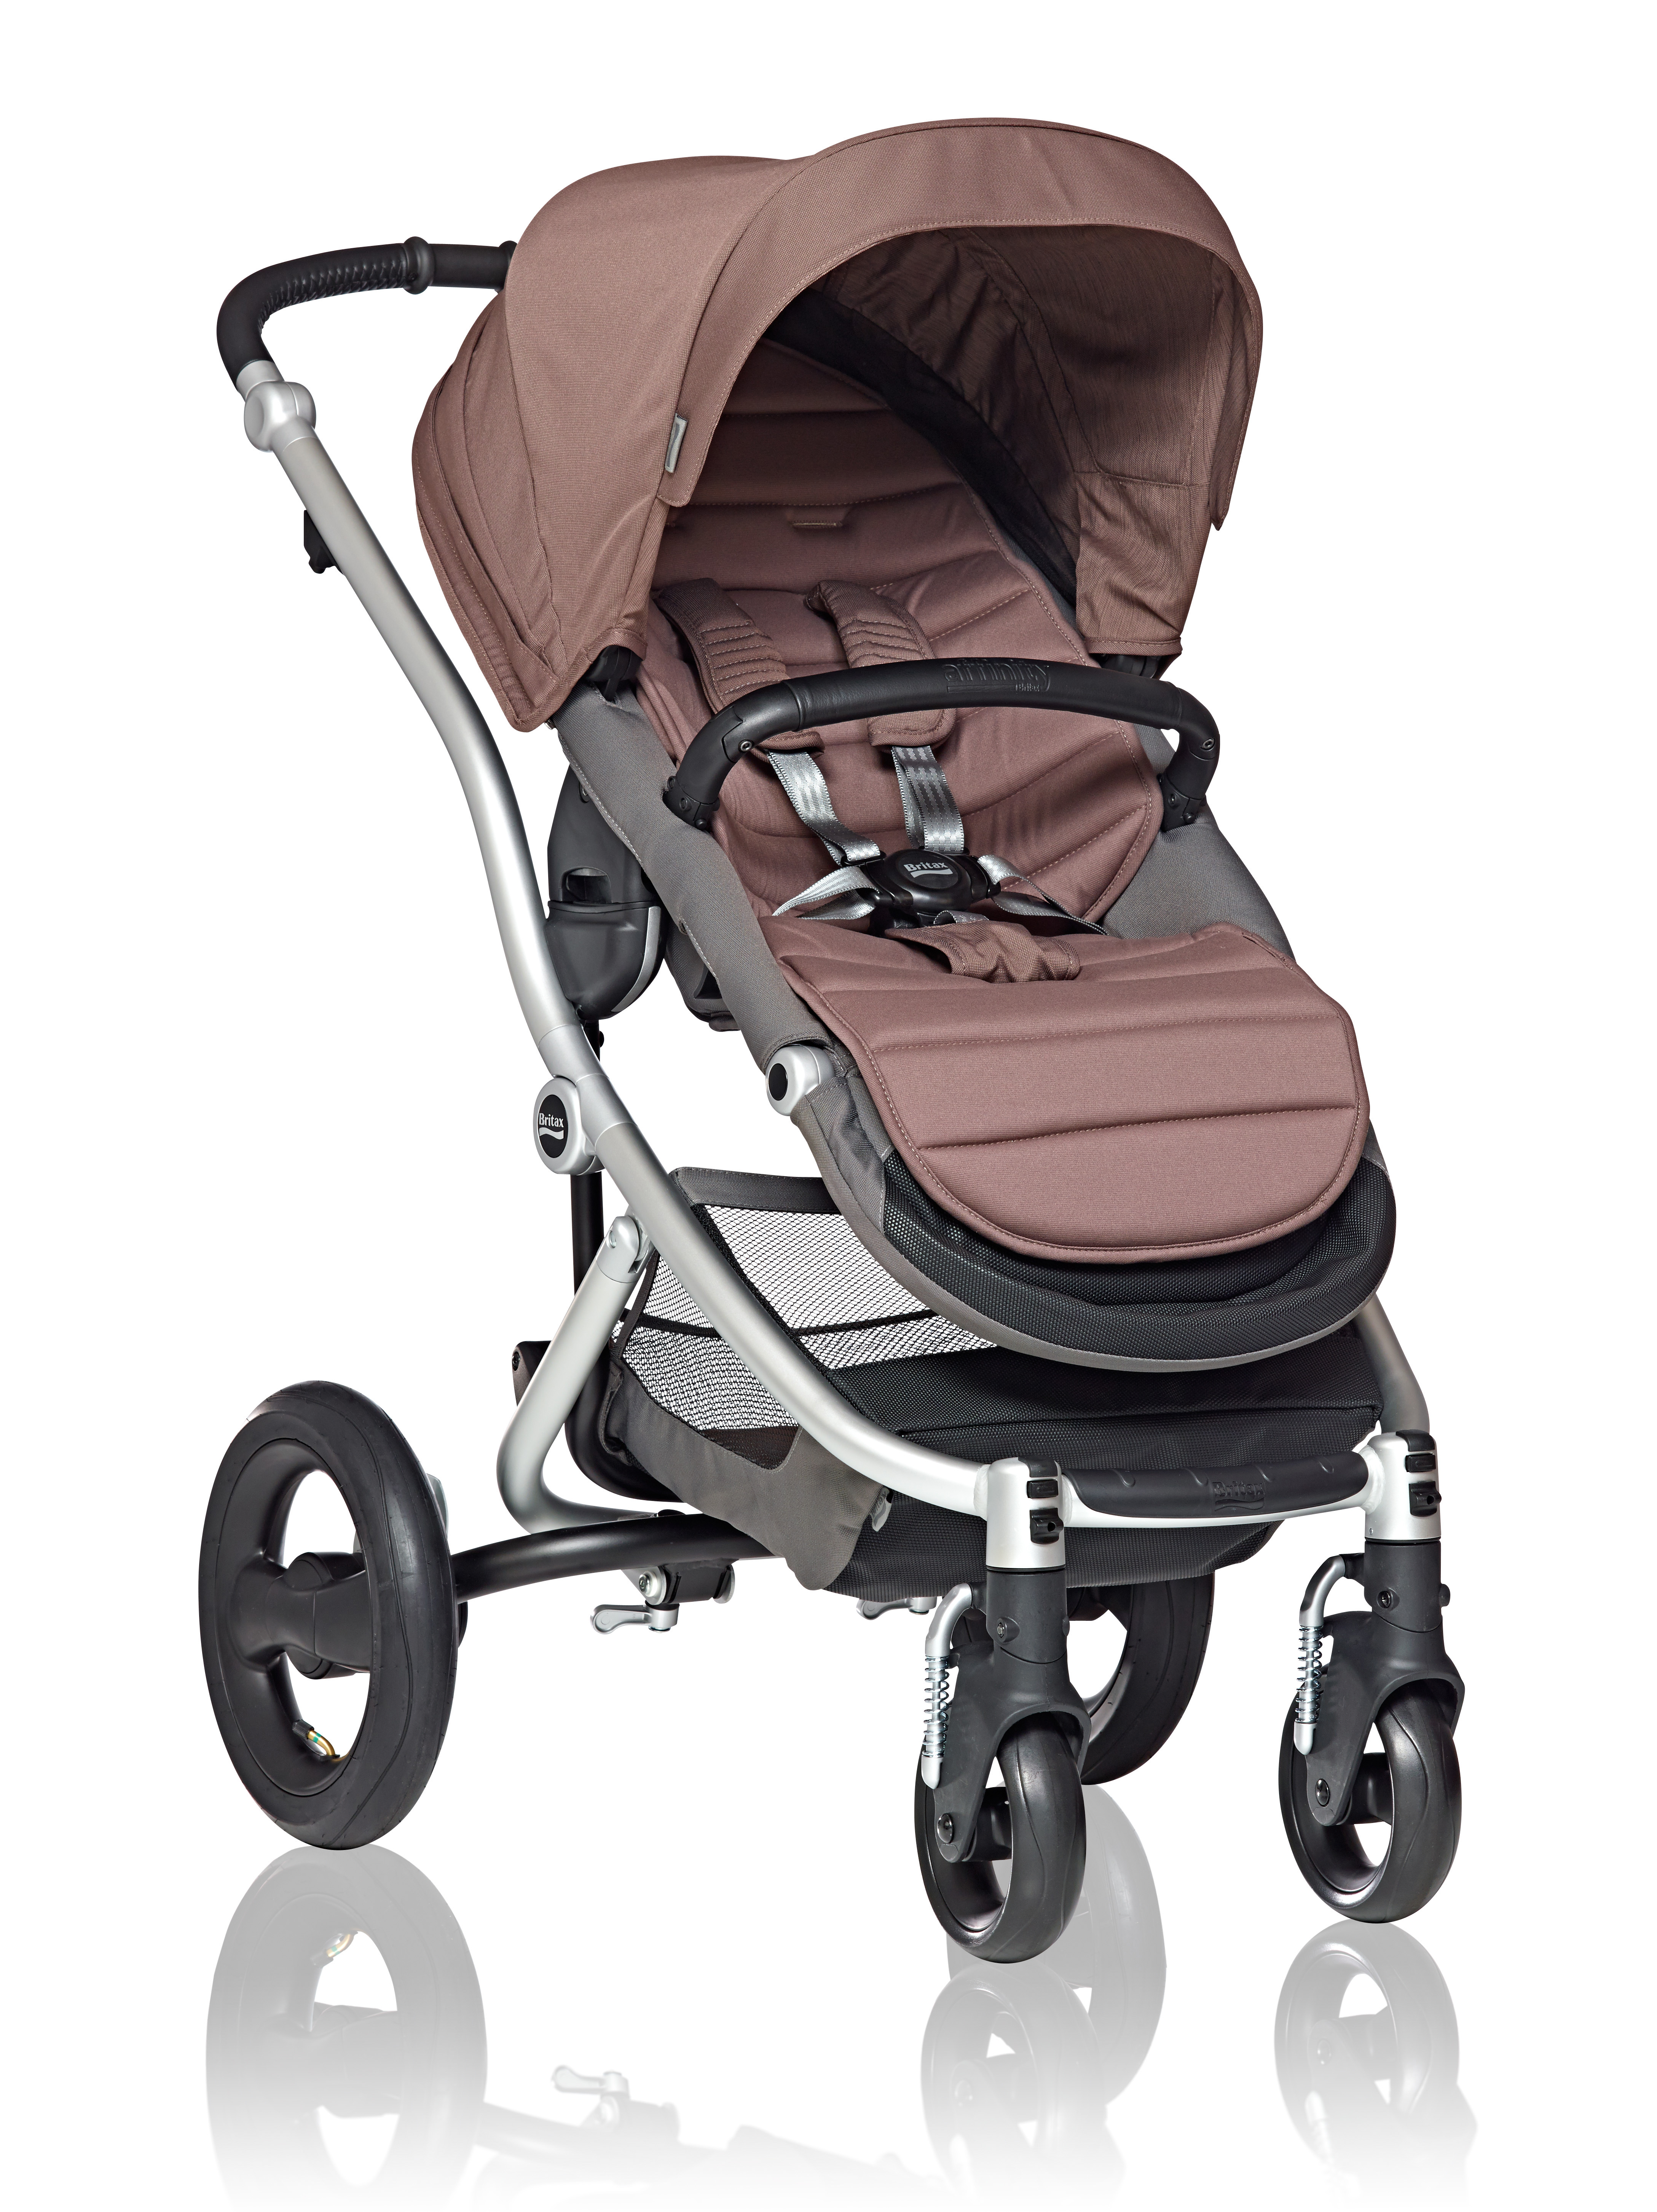 newborn stroller without car seat